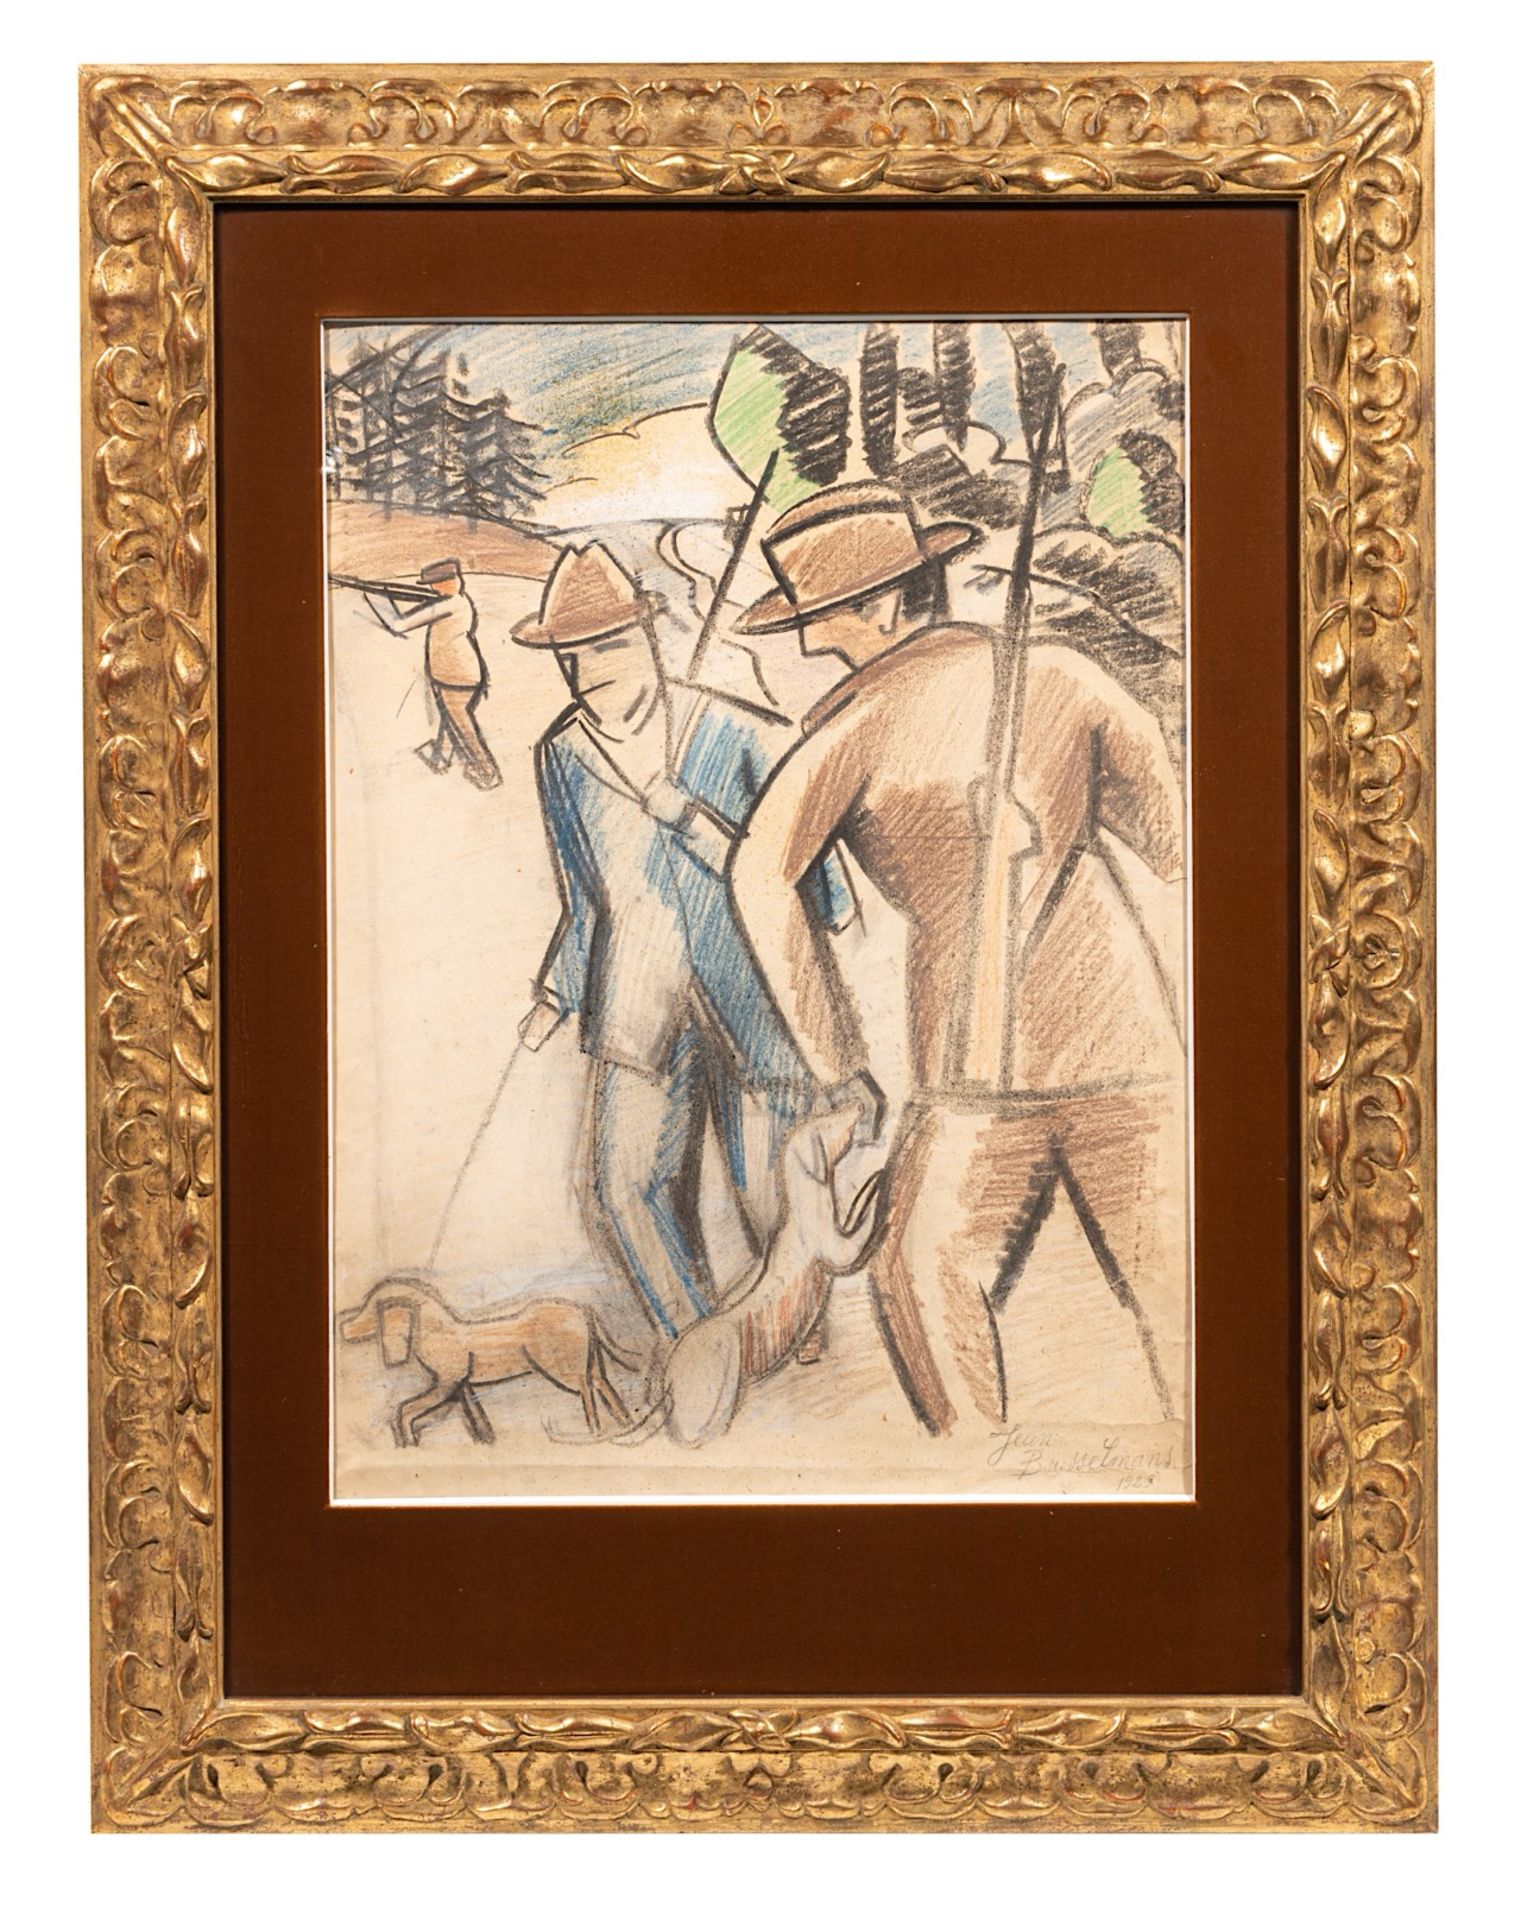 Jean Brusselmans (1884-1953), the hunters, 1925, pastel on paper, 55 x 75 cm - Image 2 of 6